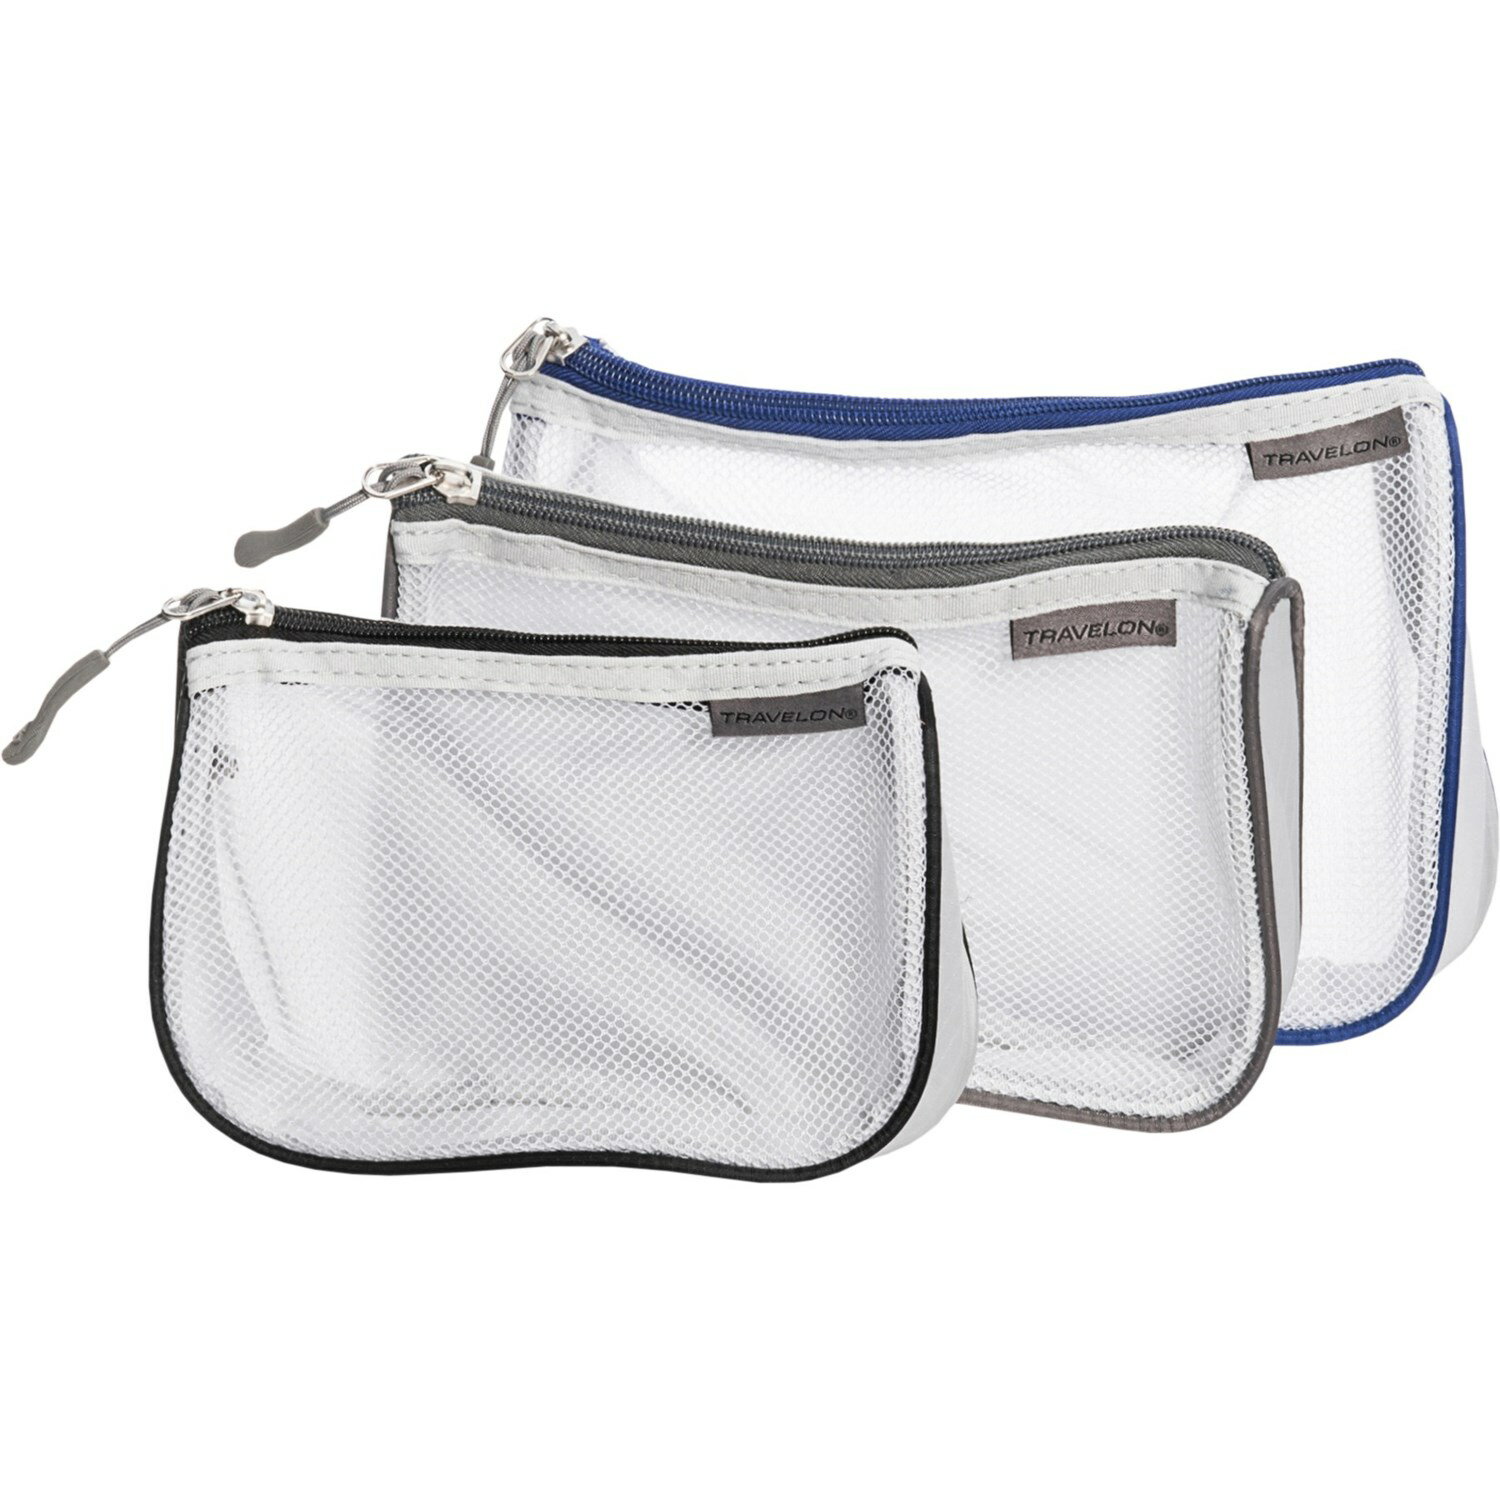 () ȥ٥ 顼-ѥץ ѥå ݡ - 3-ѥå Travelon Color-Piped Packing Pouches - 3-Pack White Mesh